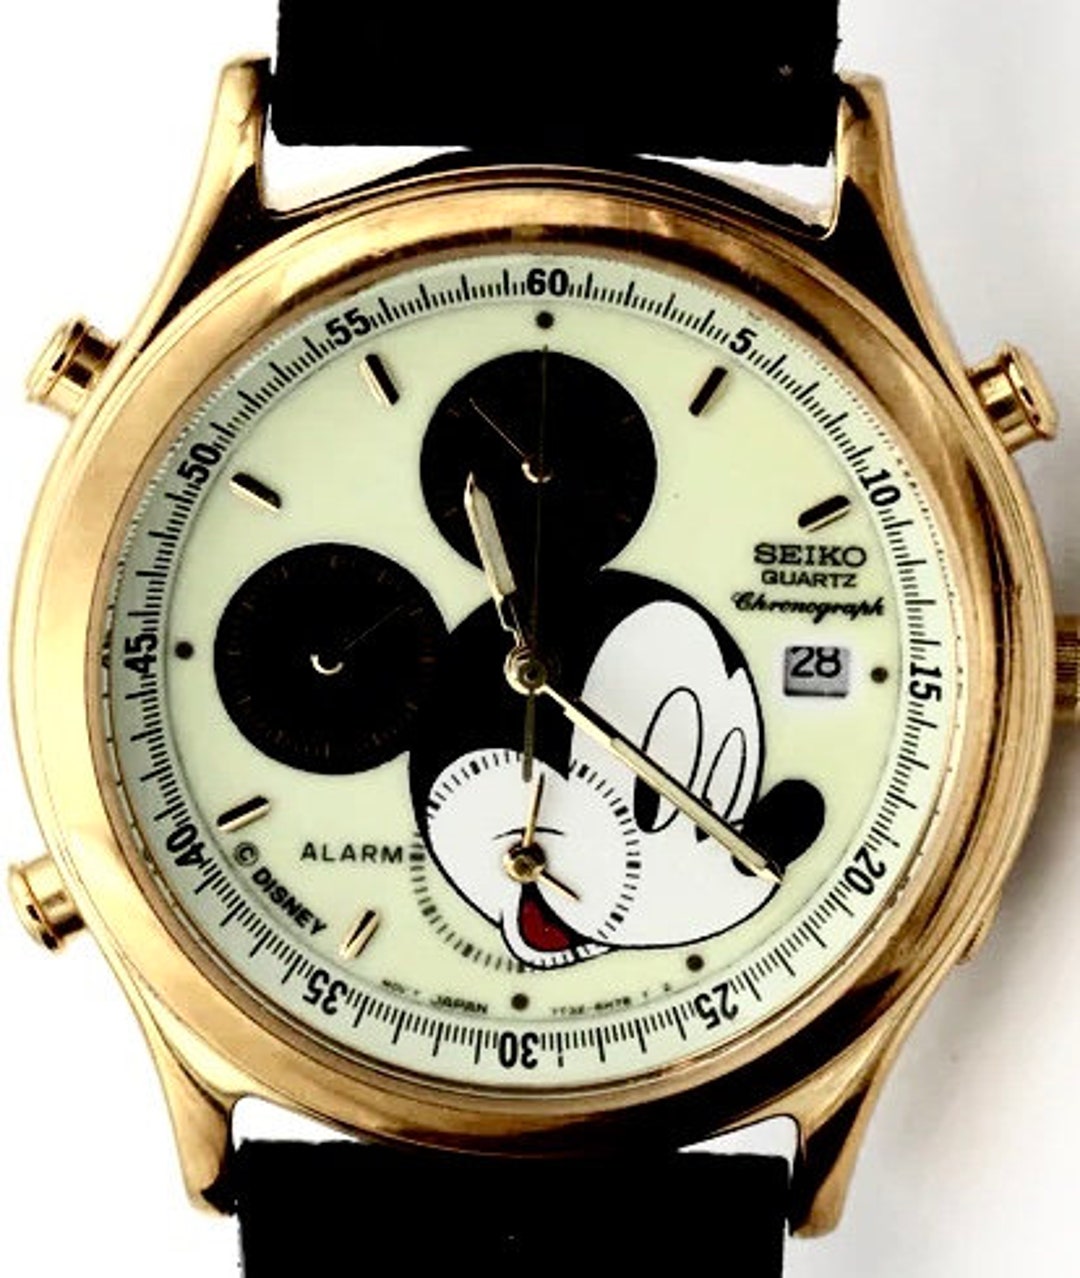 Brand-new Disney Chronograph Seiko Men's Mickey Mouse Watch Multifunction  Alarm and Glows in Dark Retired Mint - Etsy